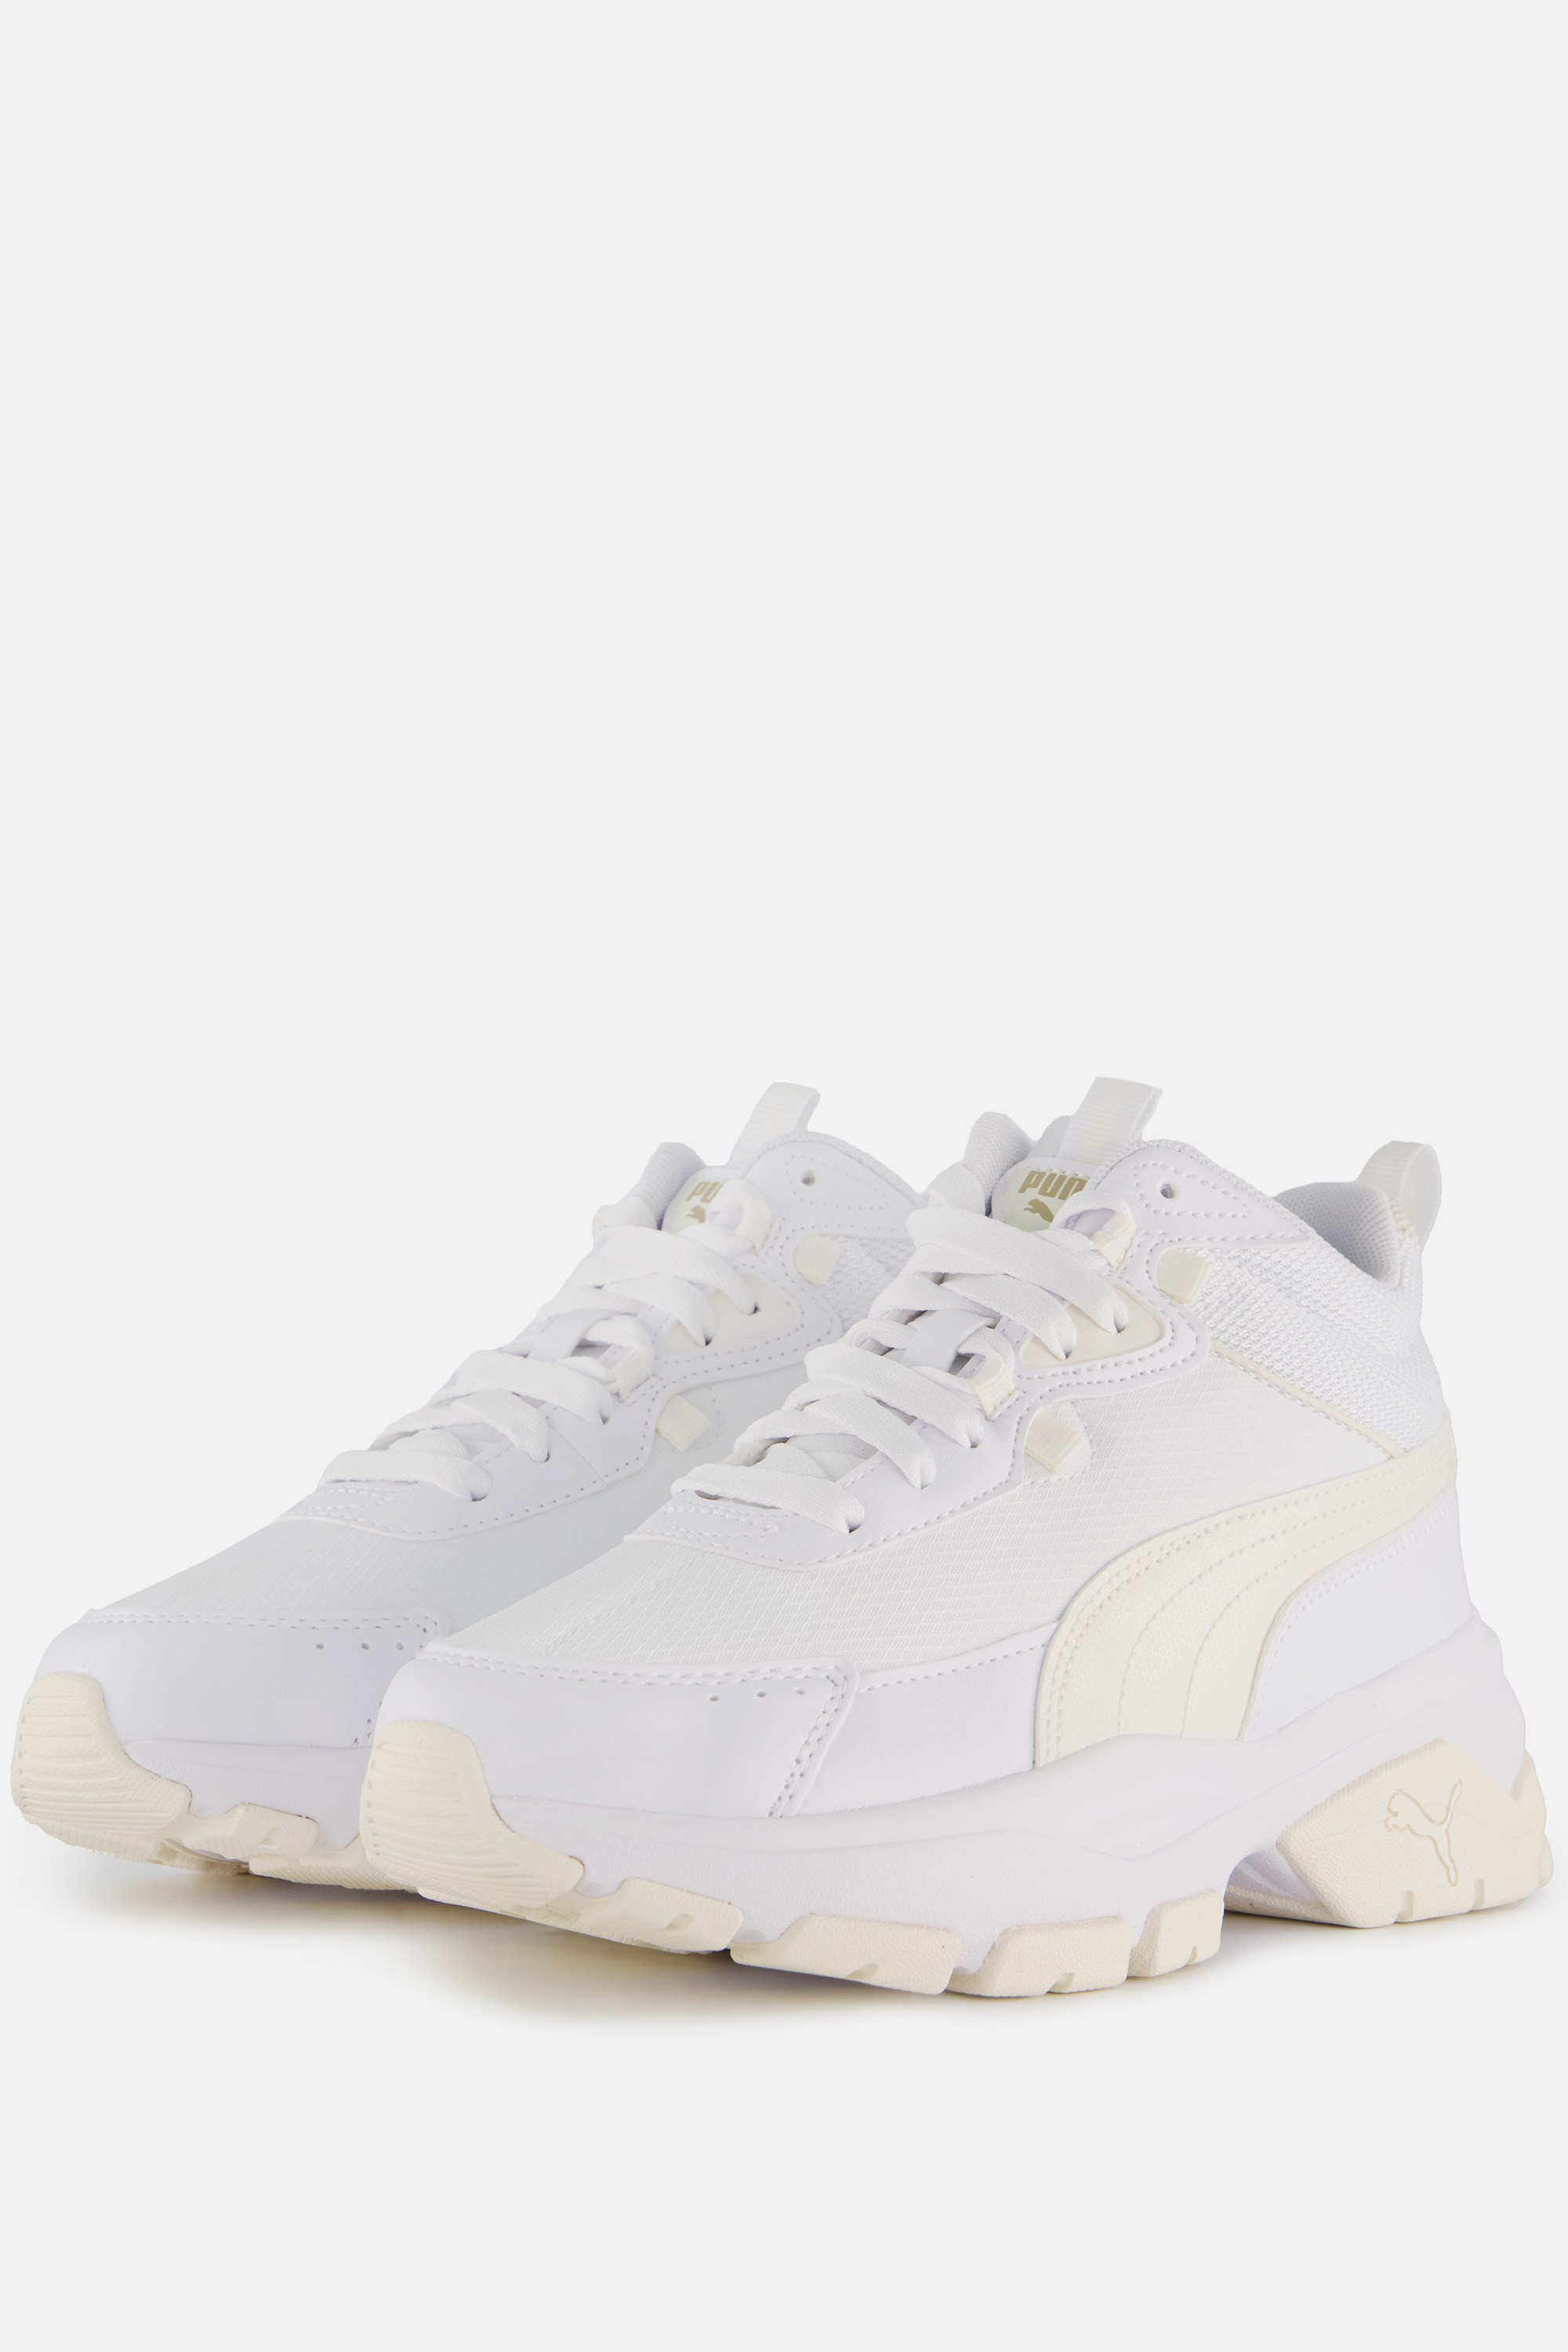 Puma Puma Cassia Via Mid Sneakers wit Syntheitsch